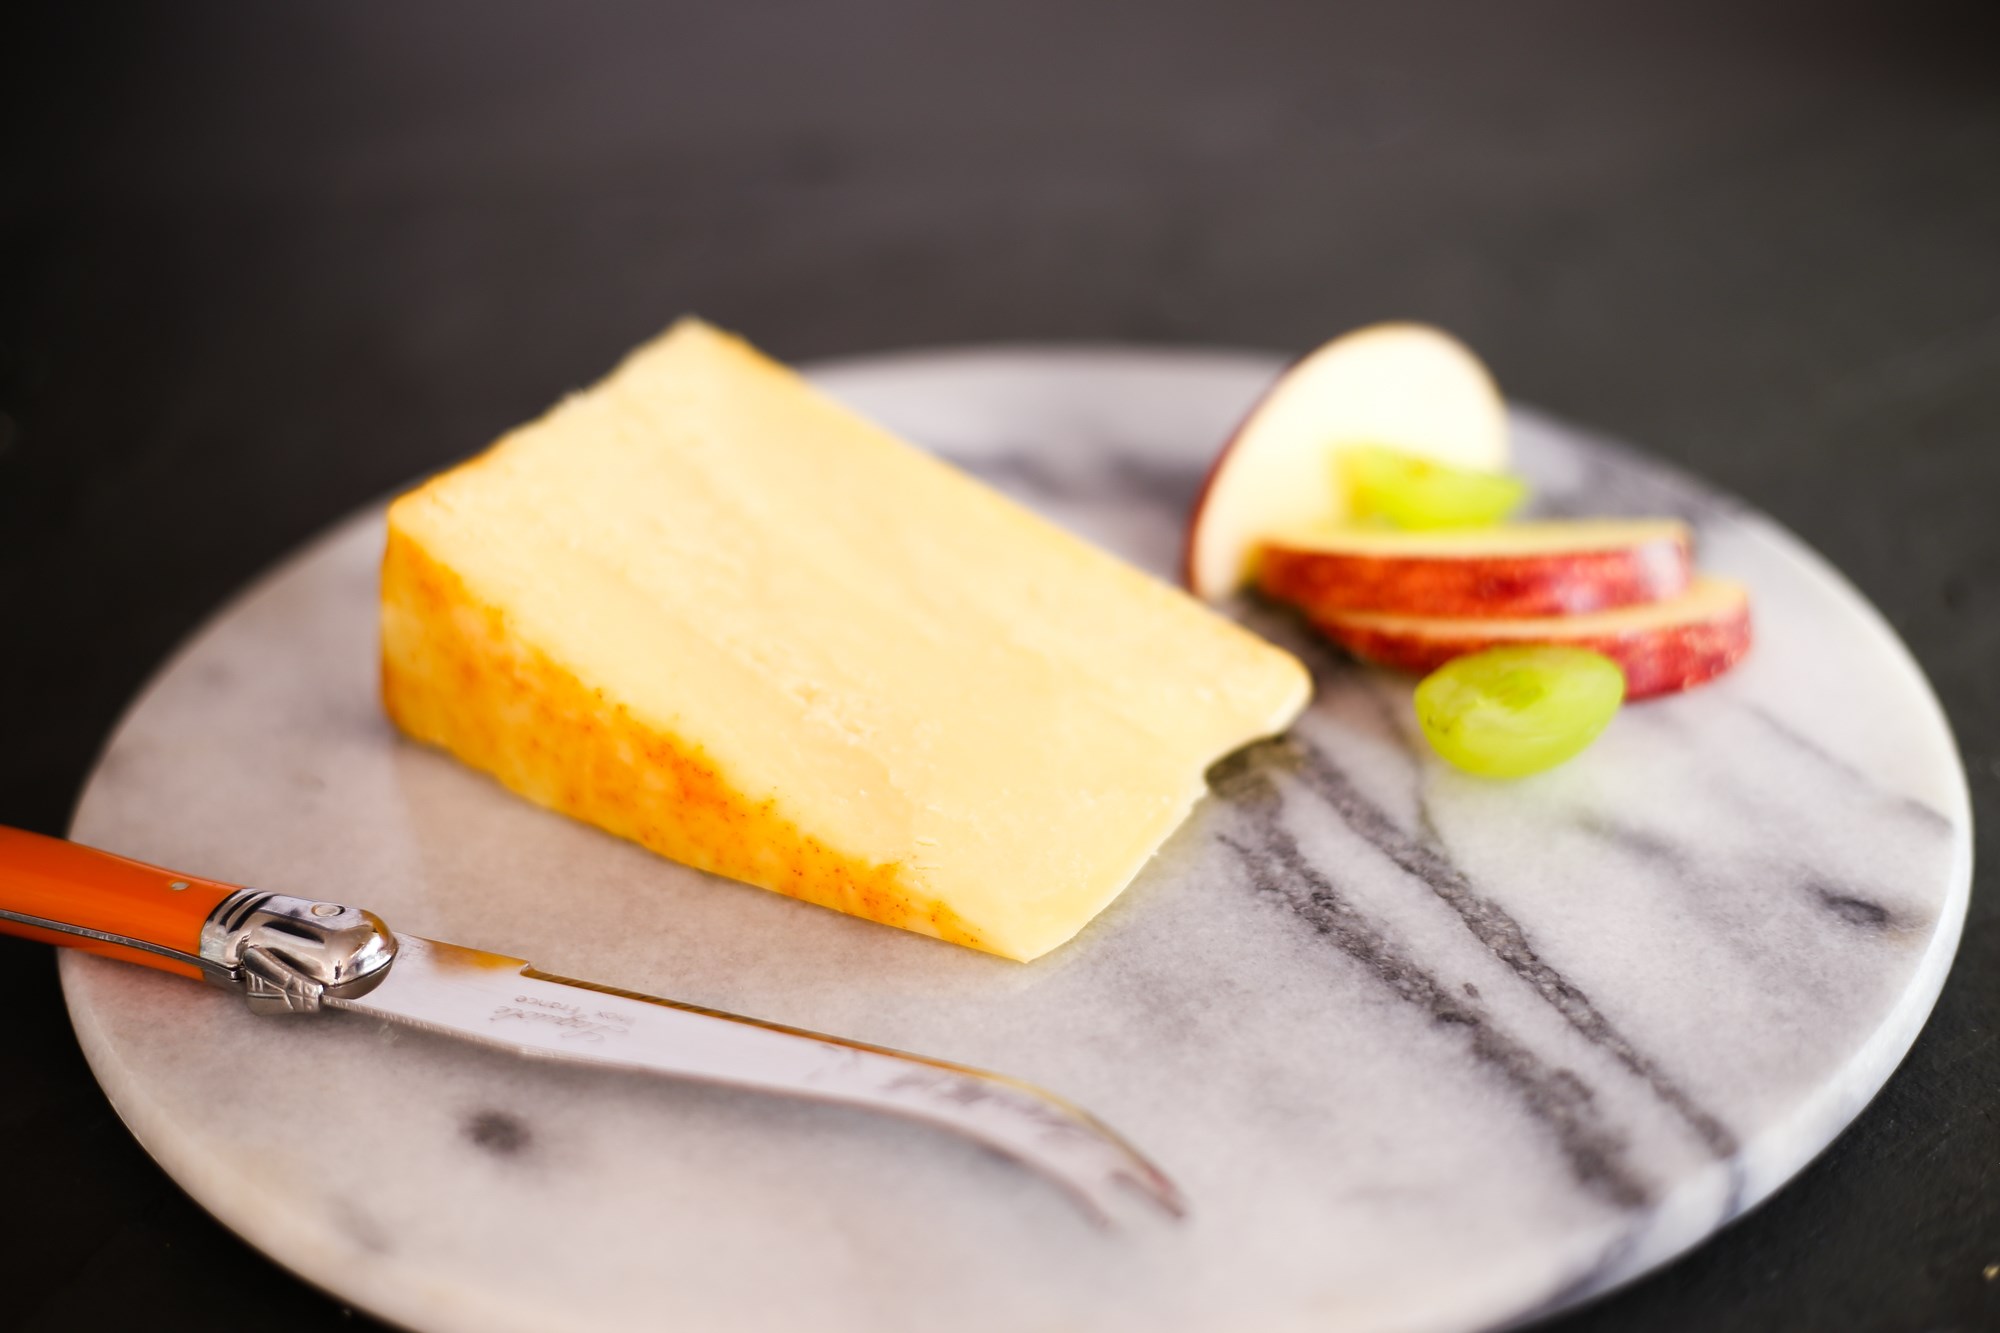 Applewood smoked cheddar cheese